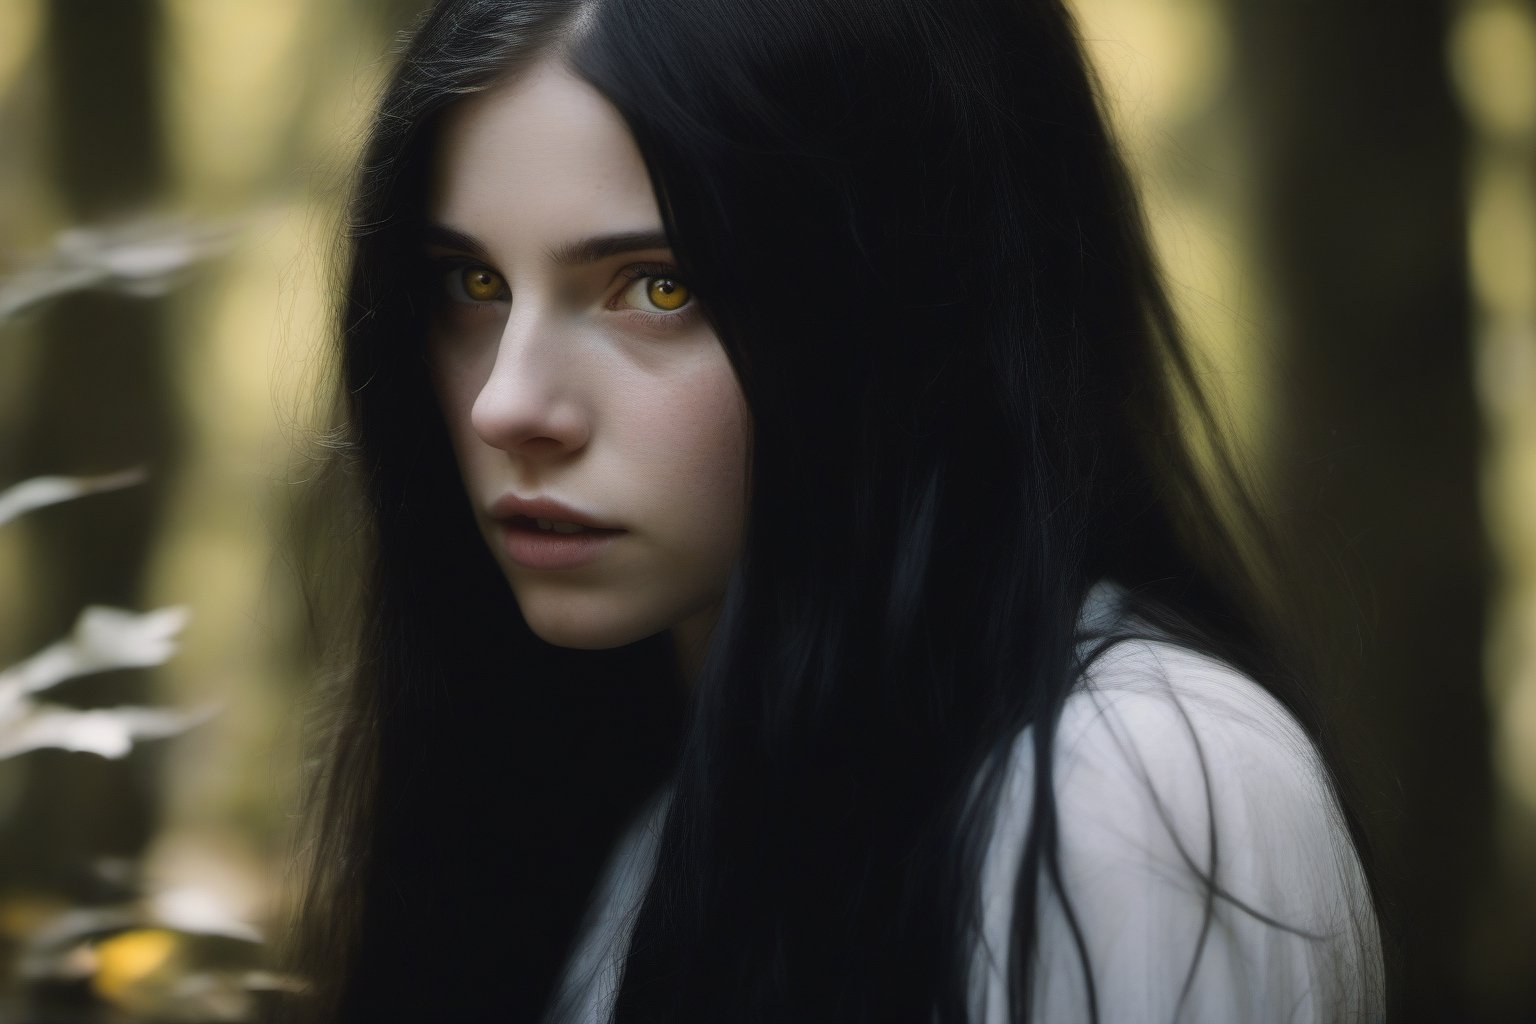 woman, younger, yellow eyes, black long hair, pale skin, forest, small nose